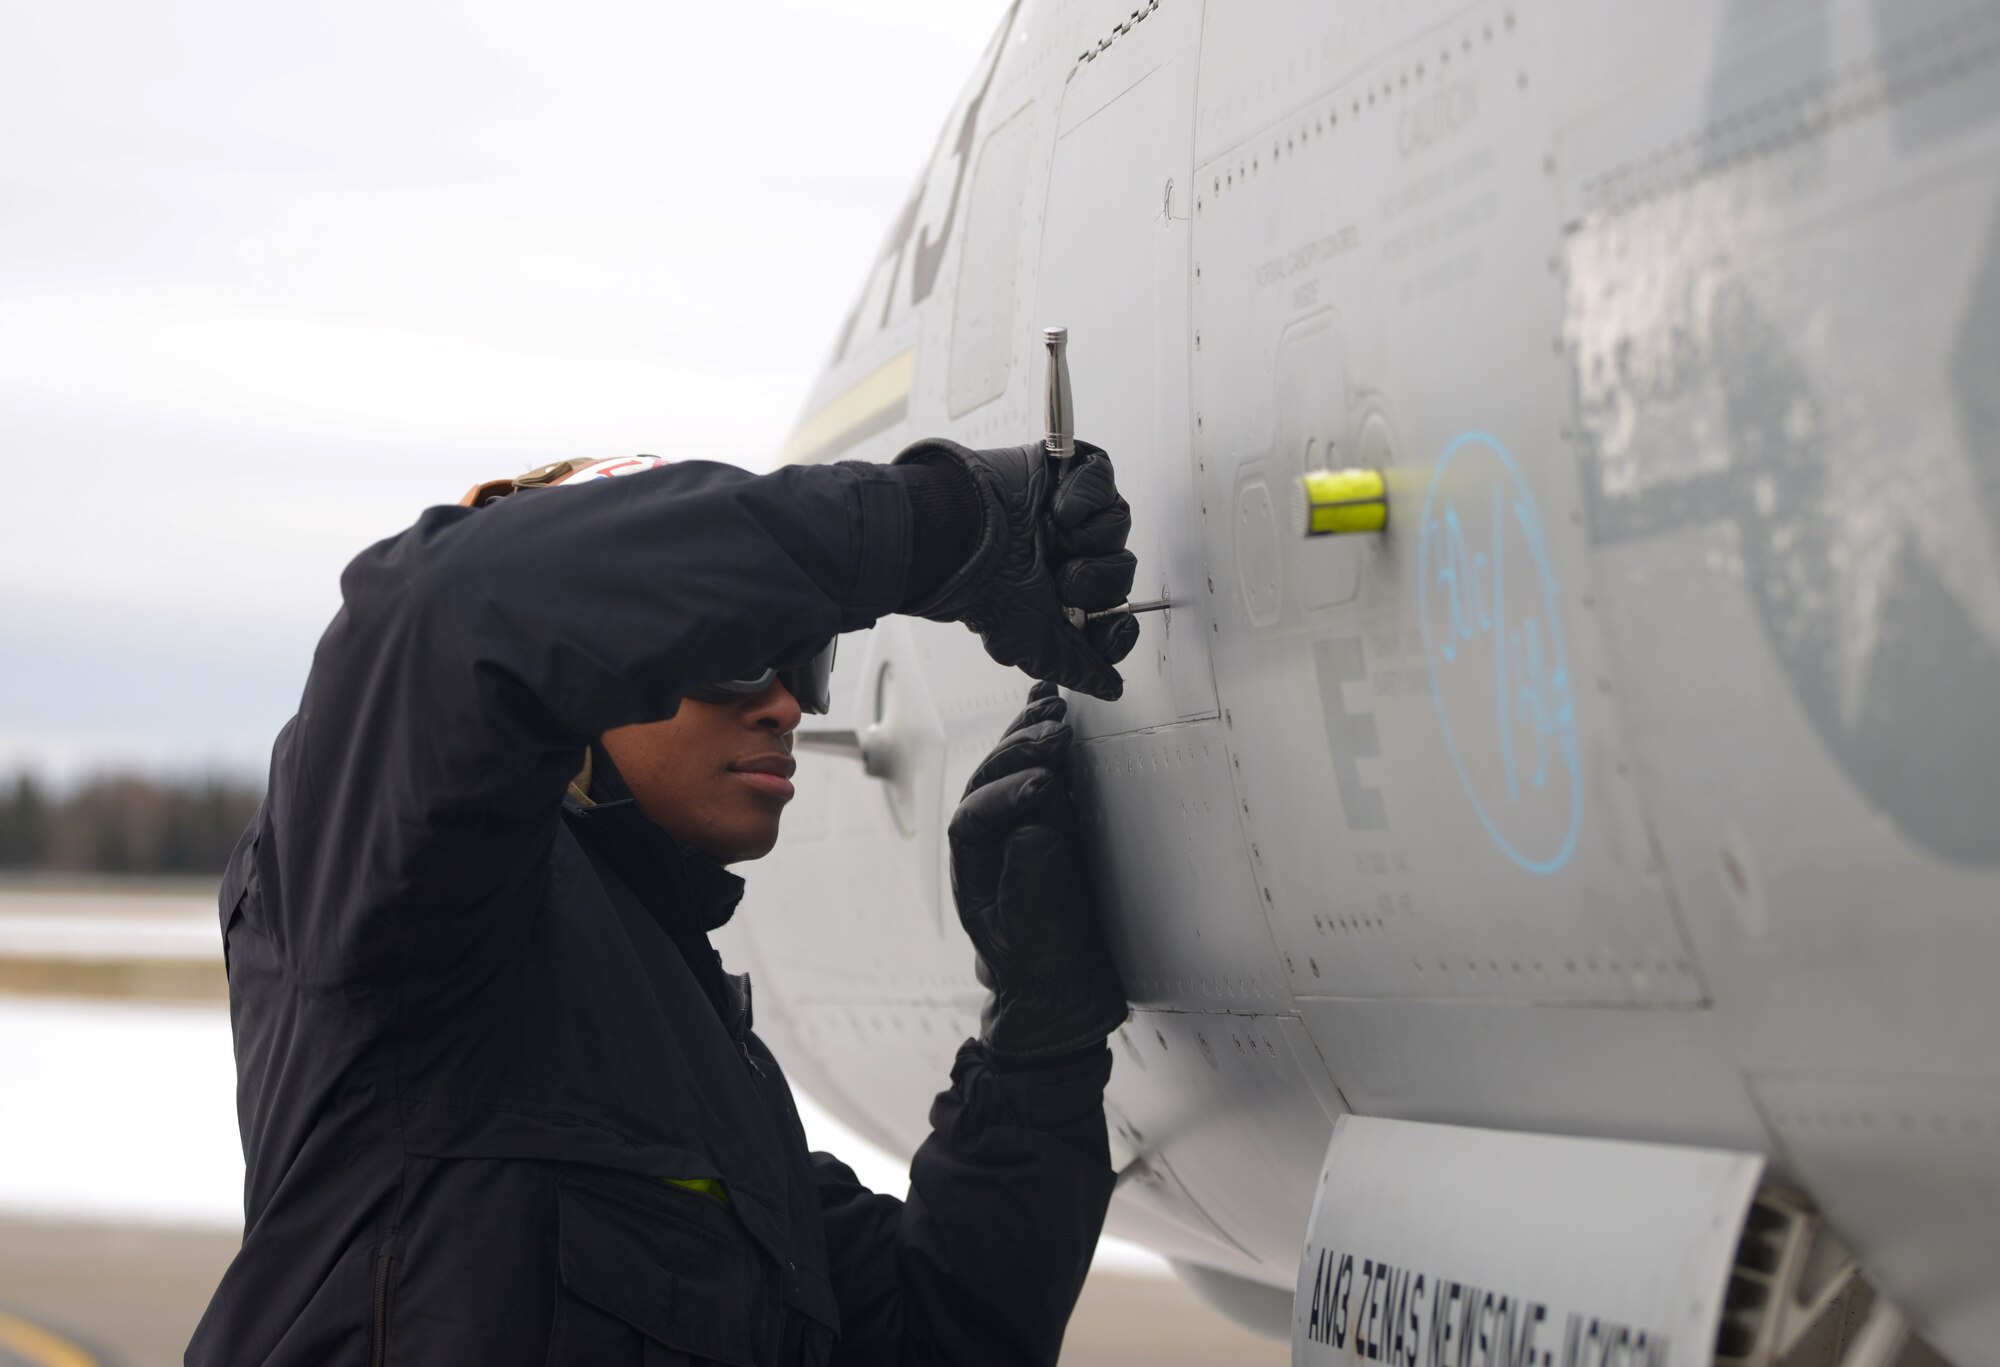 A U.S. Navy aircraft mechanic assigned to the Electronic Attack Squadron (VAQ) 132 tightens a rivet on an EA-18G Growler during RED FLAG-Alaska 21-1 on Eielson Air Force Base, Alaska, Oct. 13, 2020. Across all branches of the U.S. military, aircraft maintenance requires the utmost attention to detail to ensure that all jets are safe and ready to fly at a moment’s notice. (U.S. Air Force photo by Senior Airman Beaux Hebert)